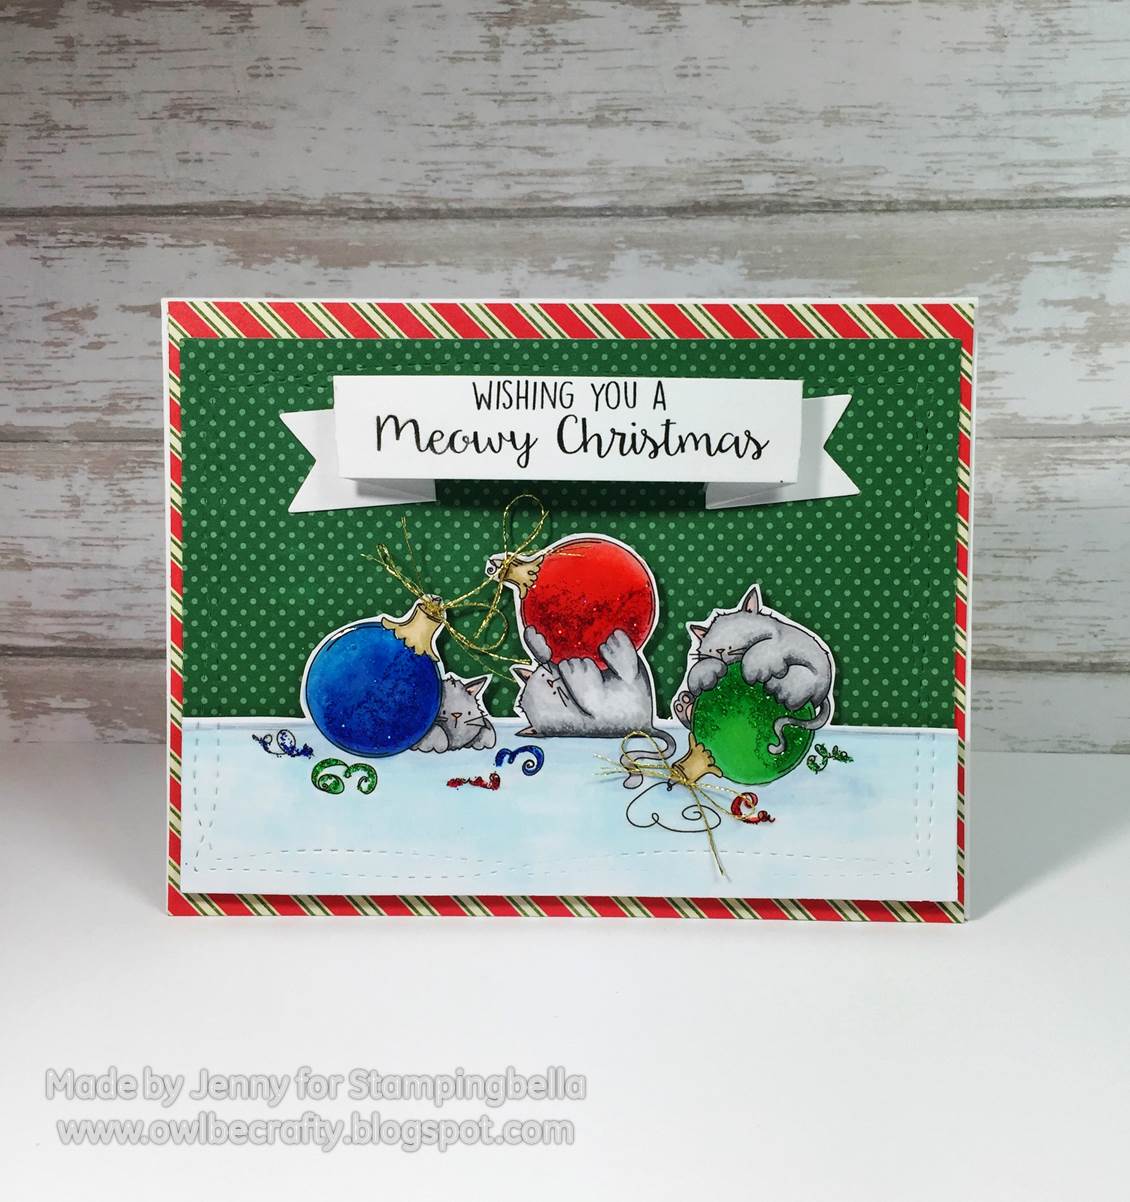 STAMPING BELLA HOLIDAY RELEASE- MEOWY CHRISTMAS